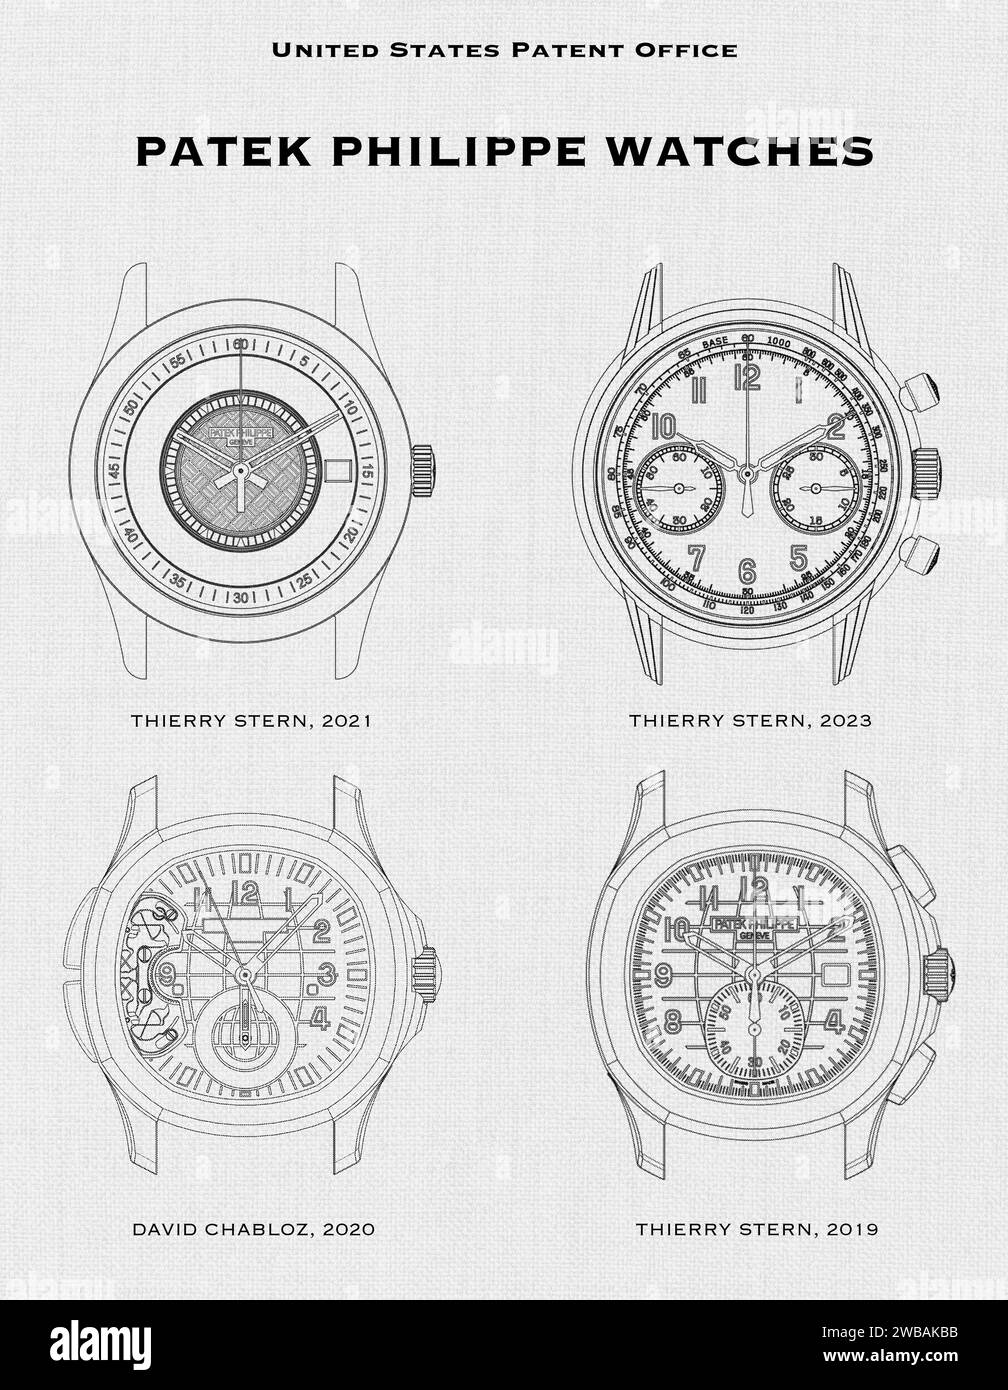 US patent office designs of watch faces for Patek Philippe watches on a white background Stock Photo